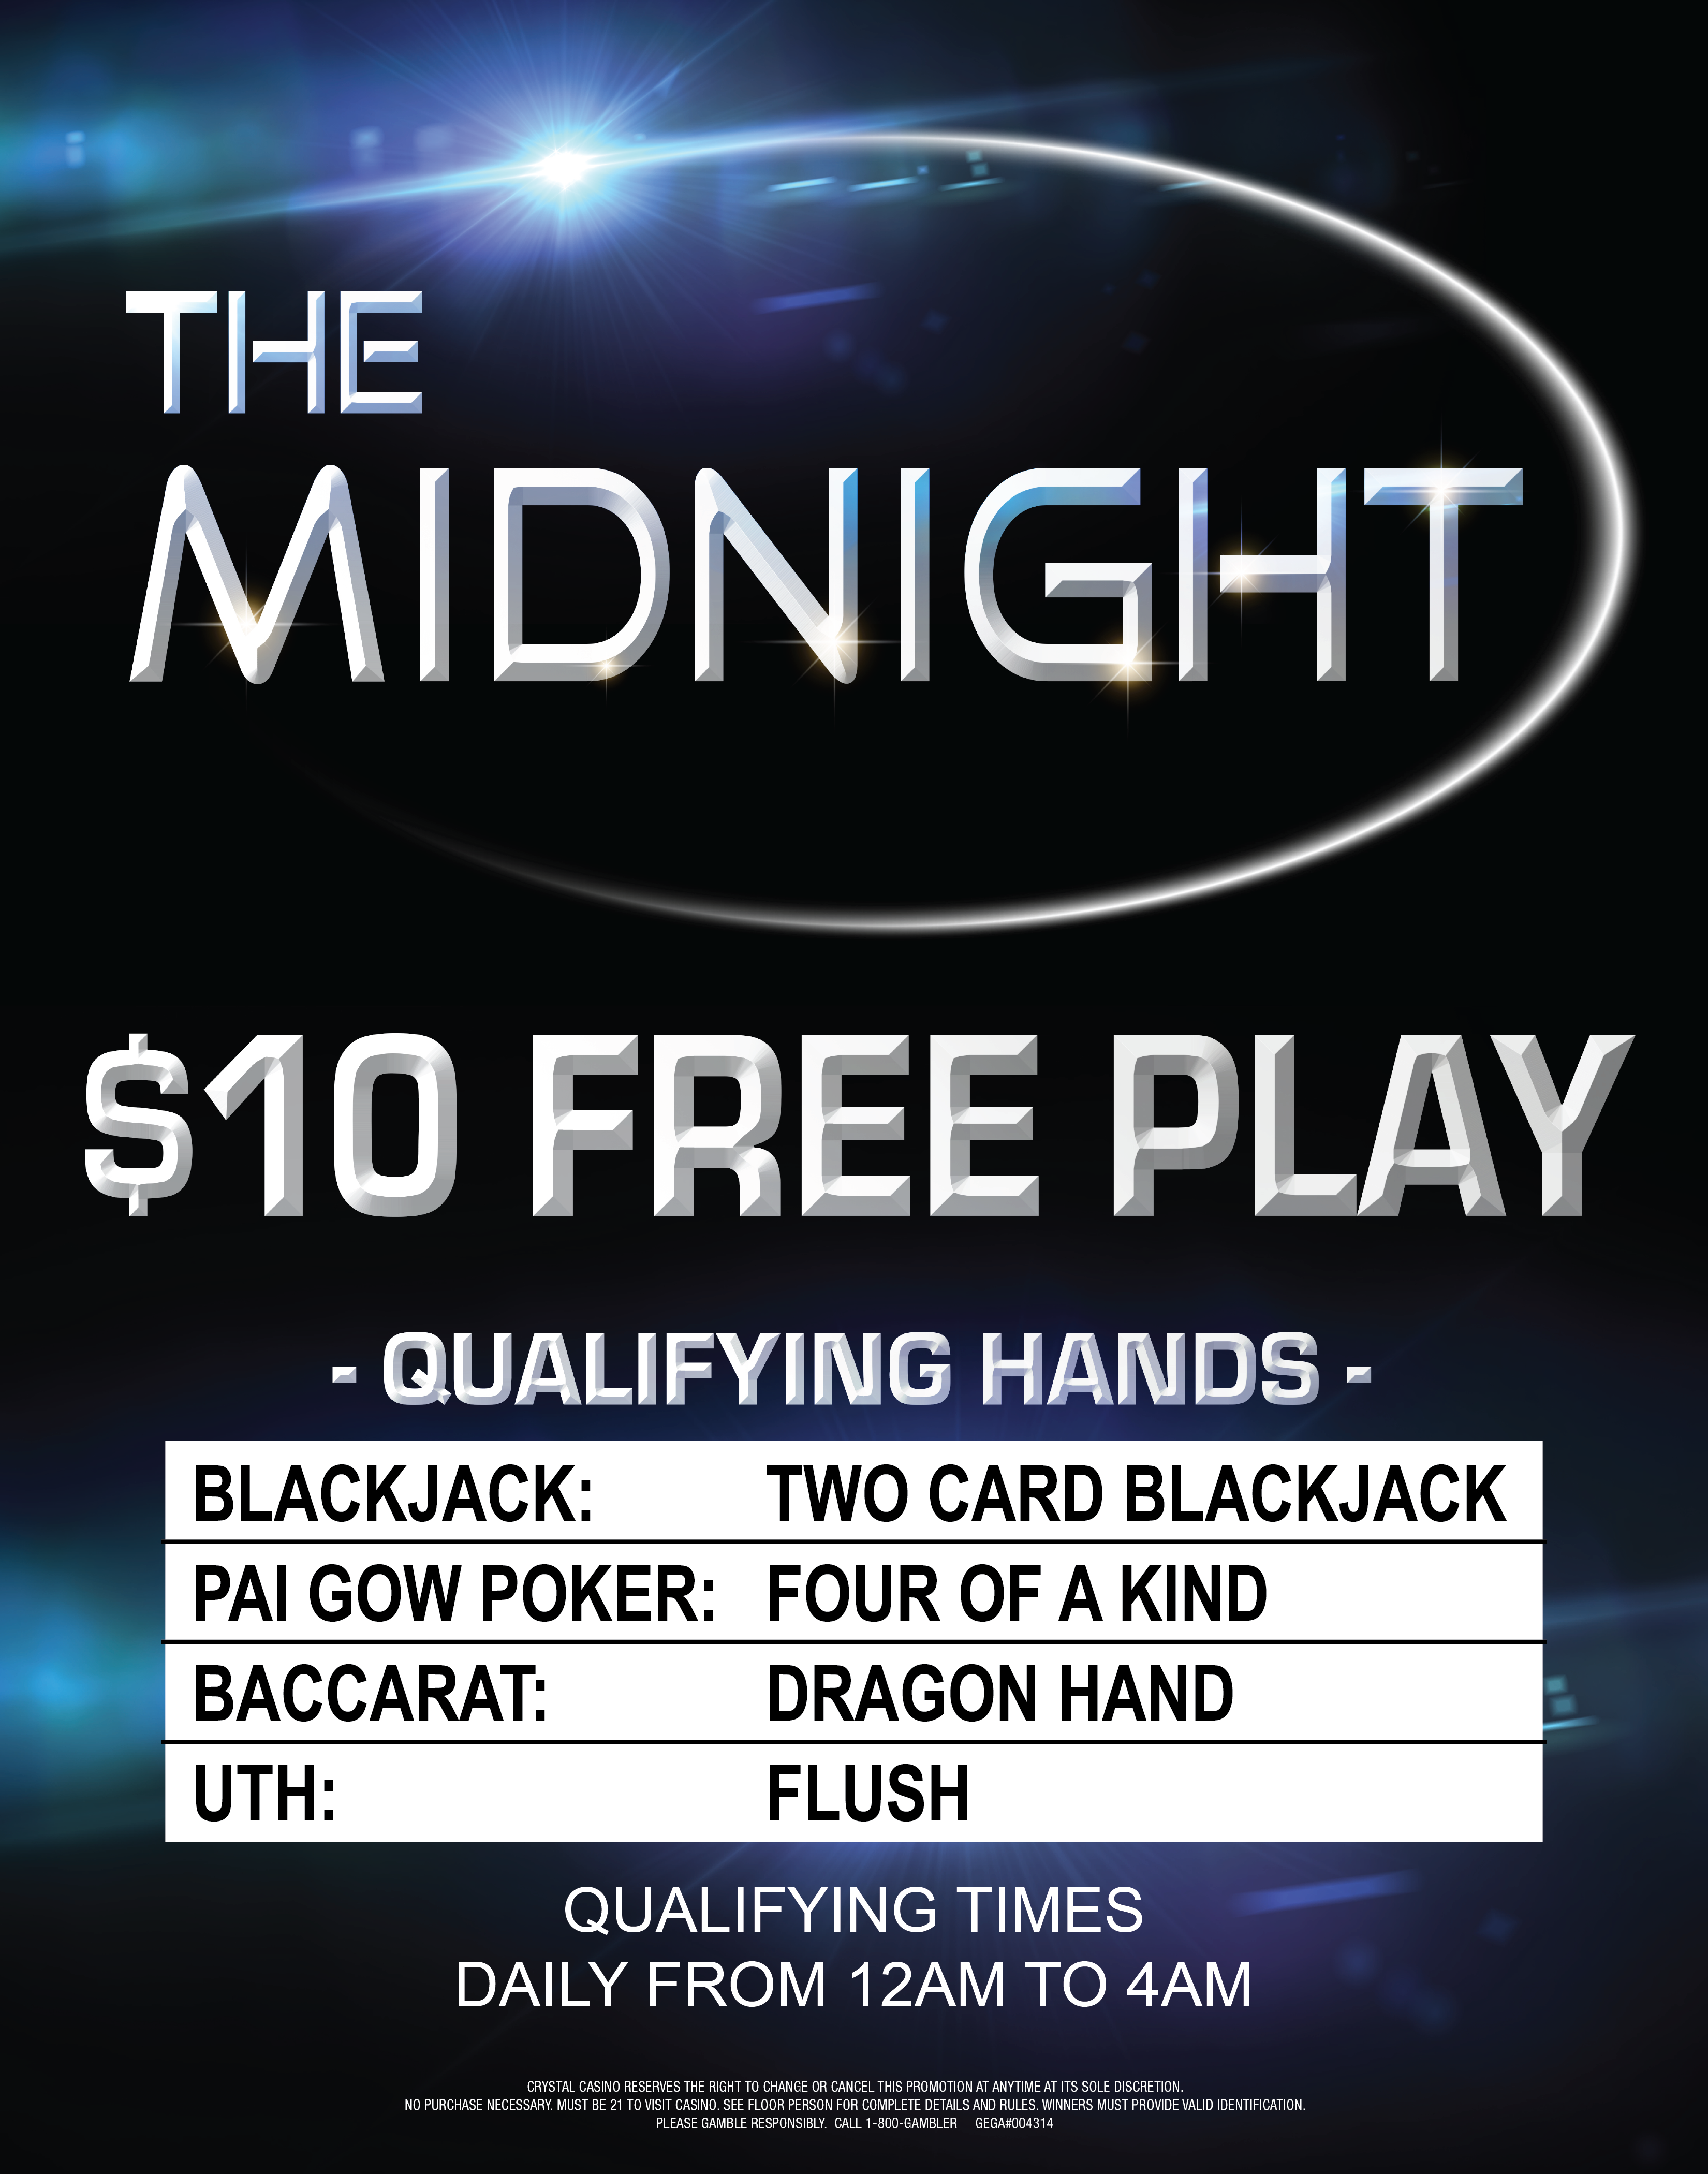 Get $10 FREE PLAY with qualifying hands. 12am to 4am Daily